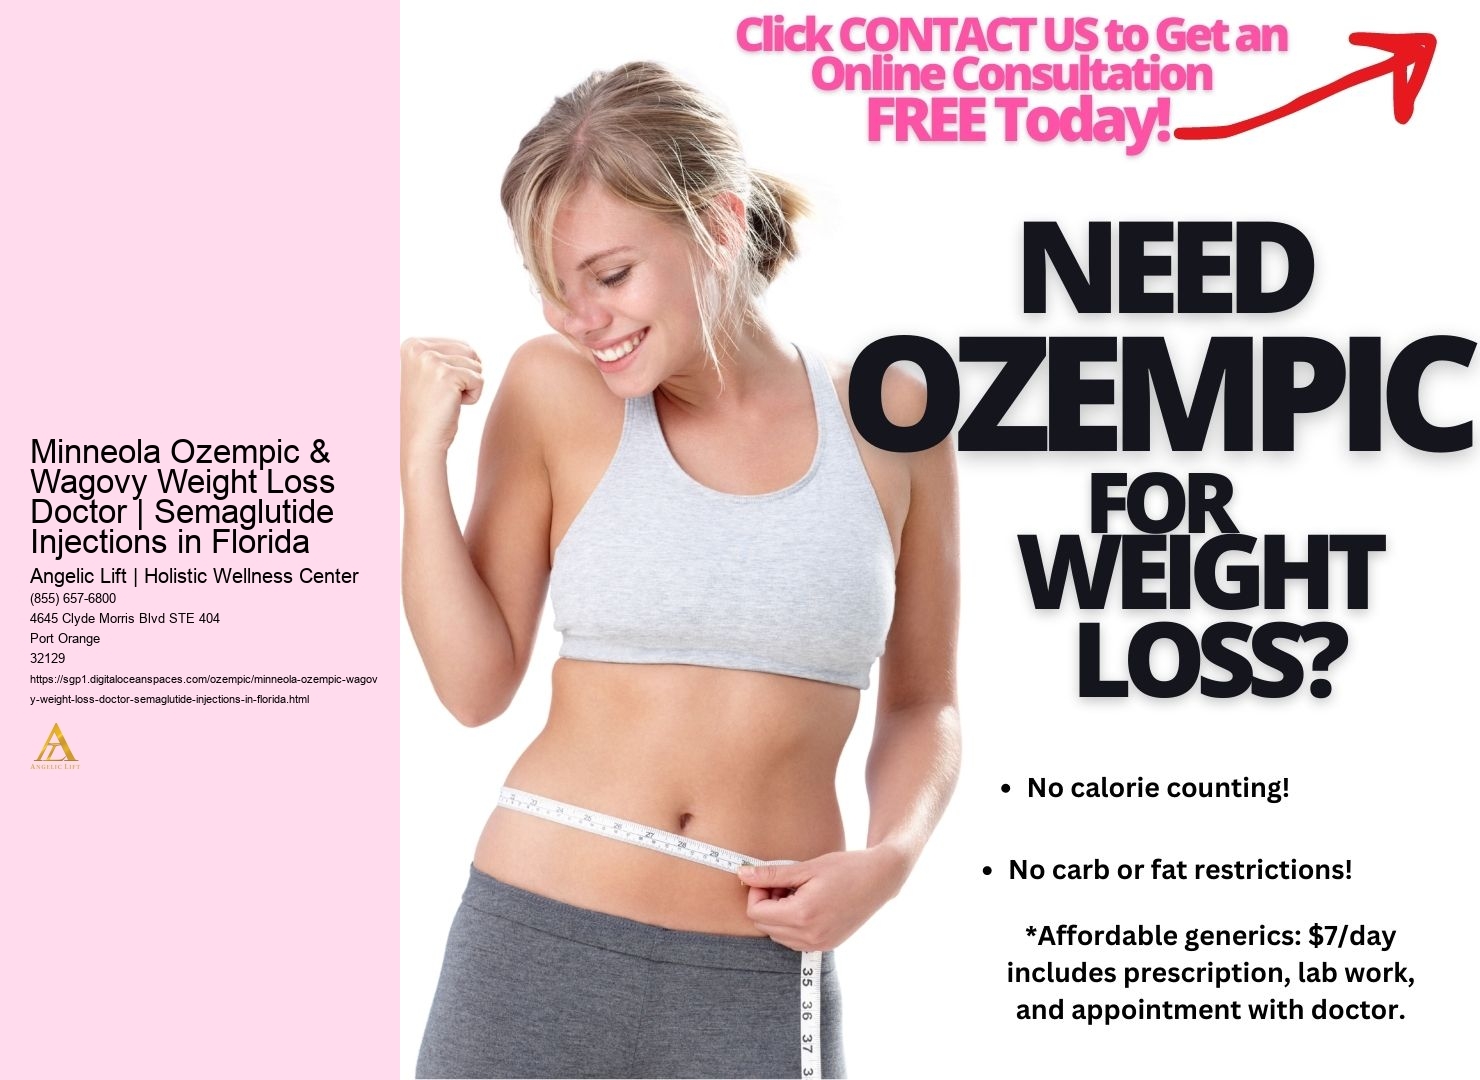 Minneola Ozempic & Wagovy Weight Loss Doctor | Semaglutide Injections in Florida